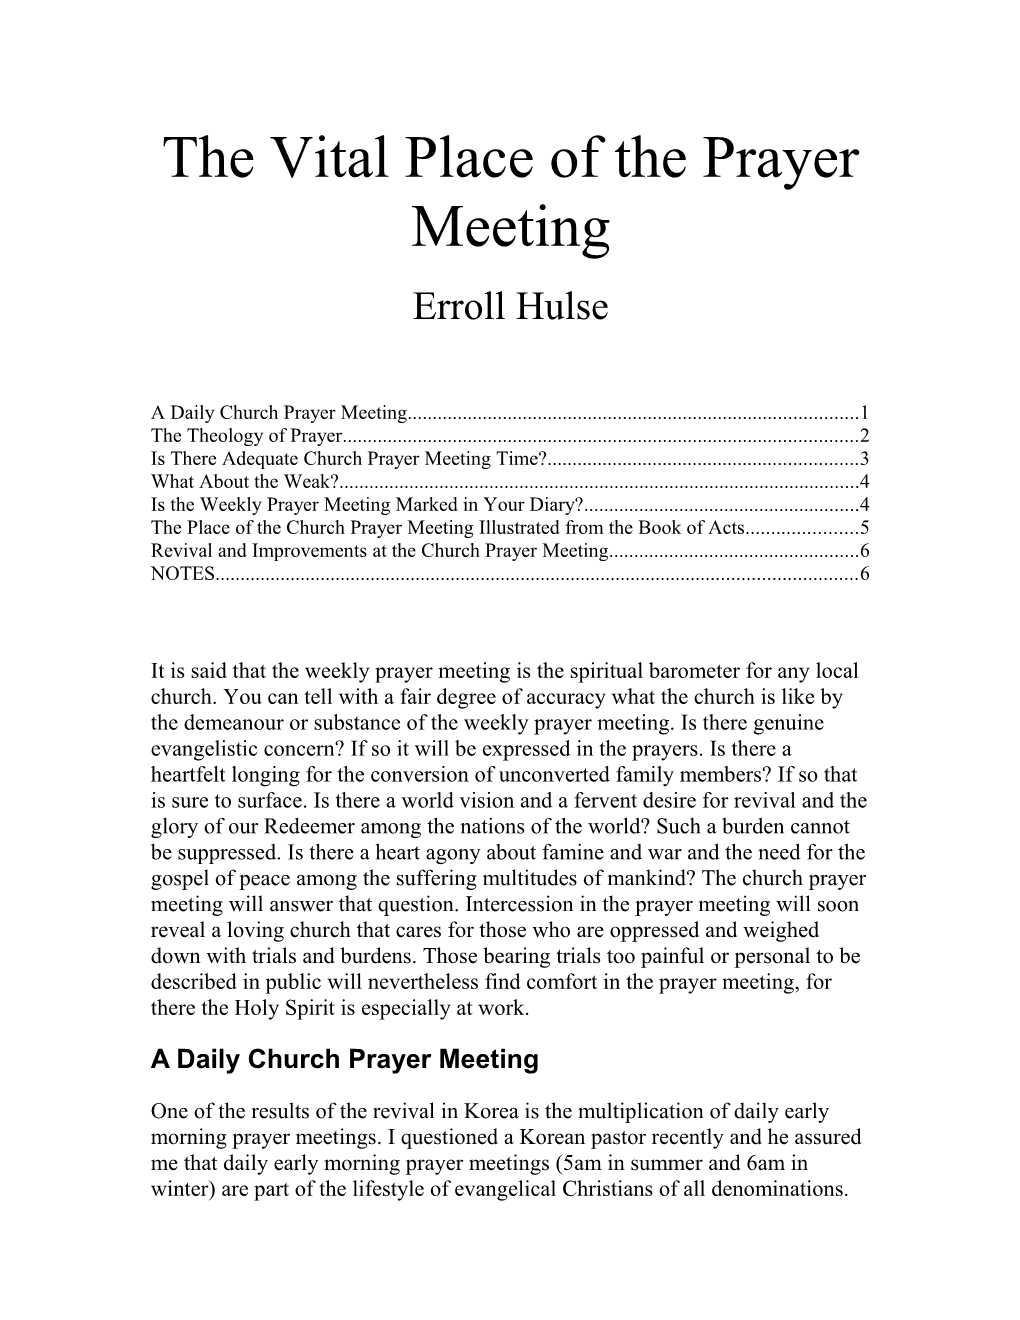 The Vital Place of the Prayer Meeting